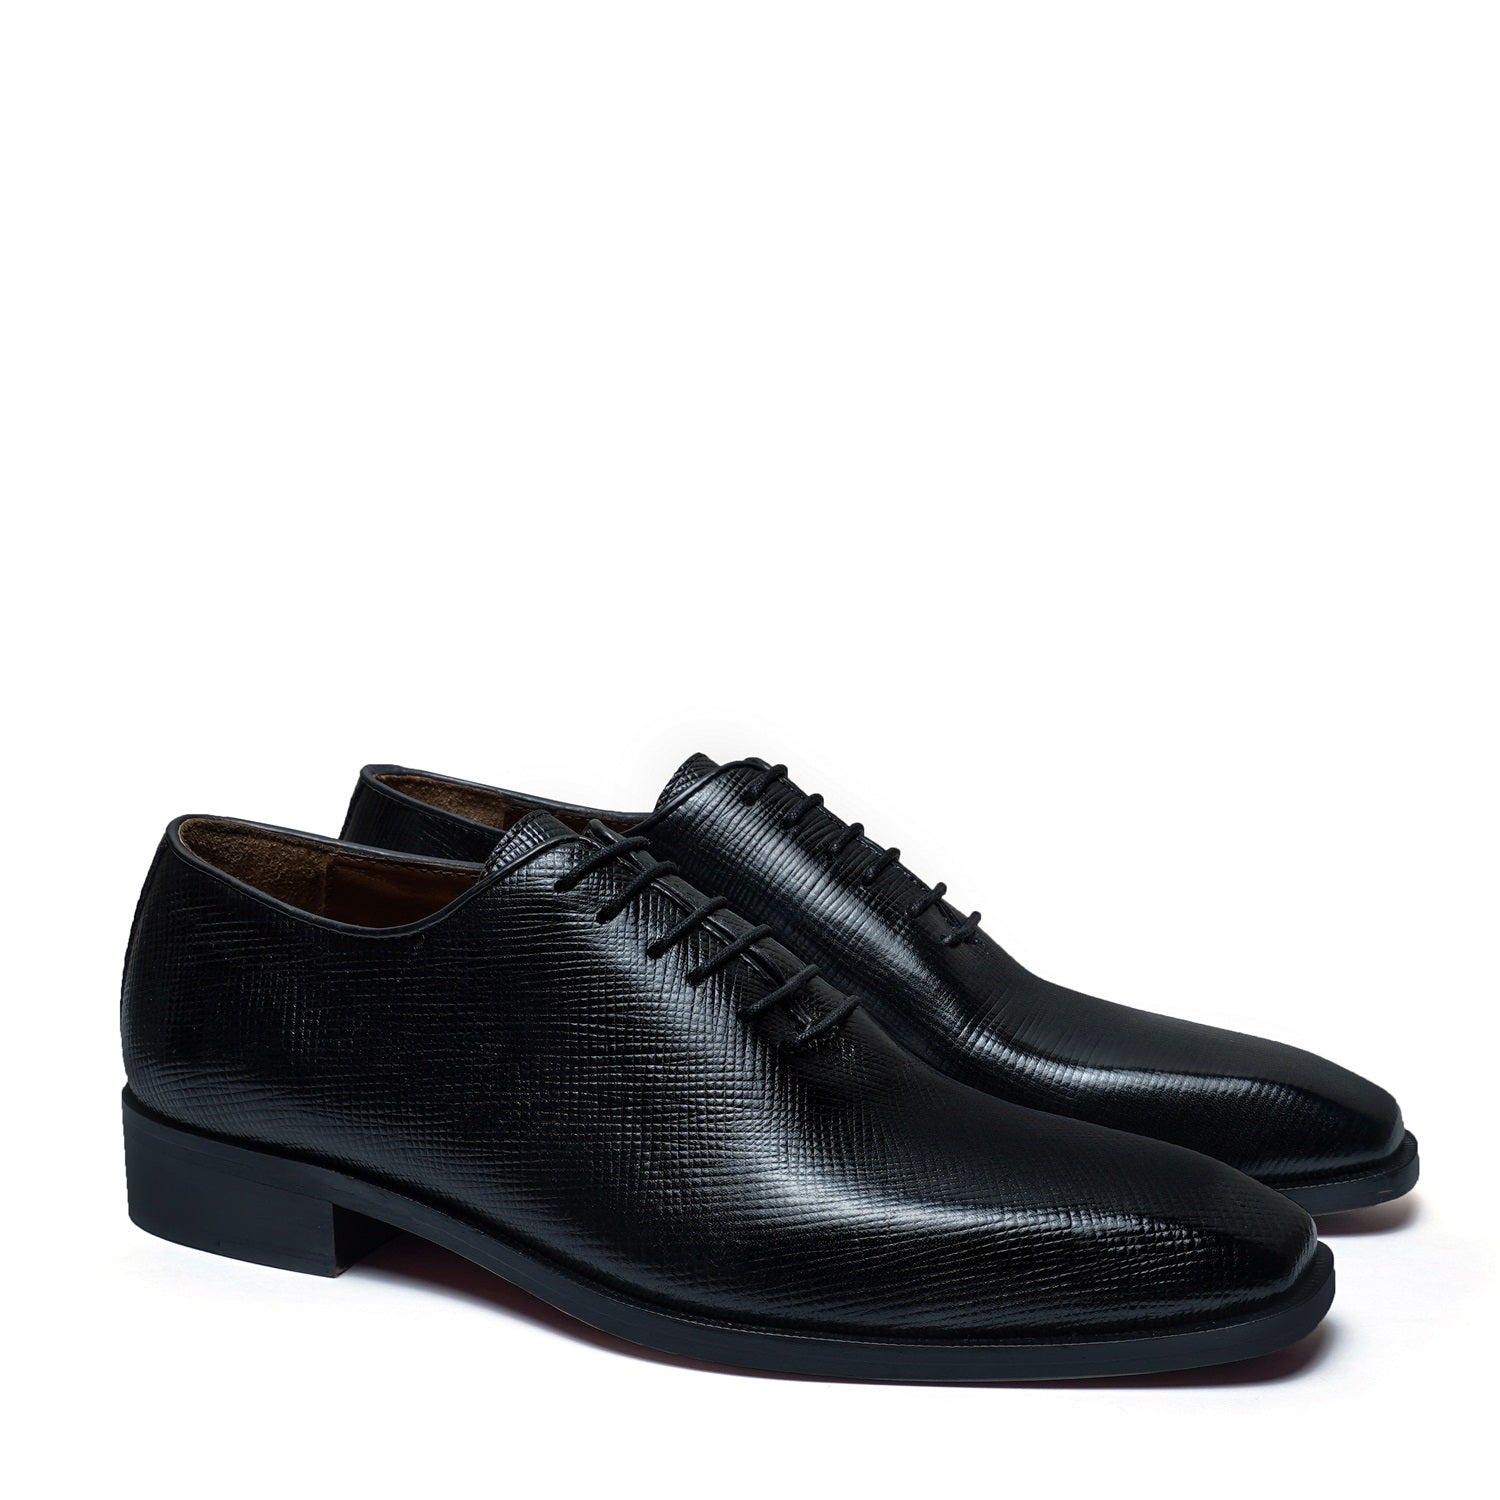 Oxford Lace-Up Formal Shoes in Black Saffiano Leather